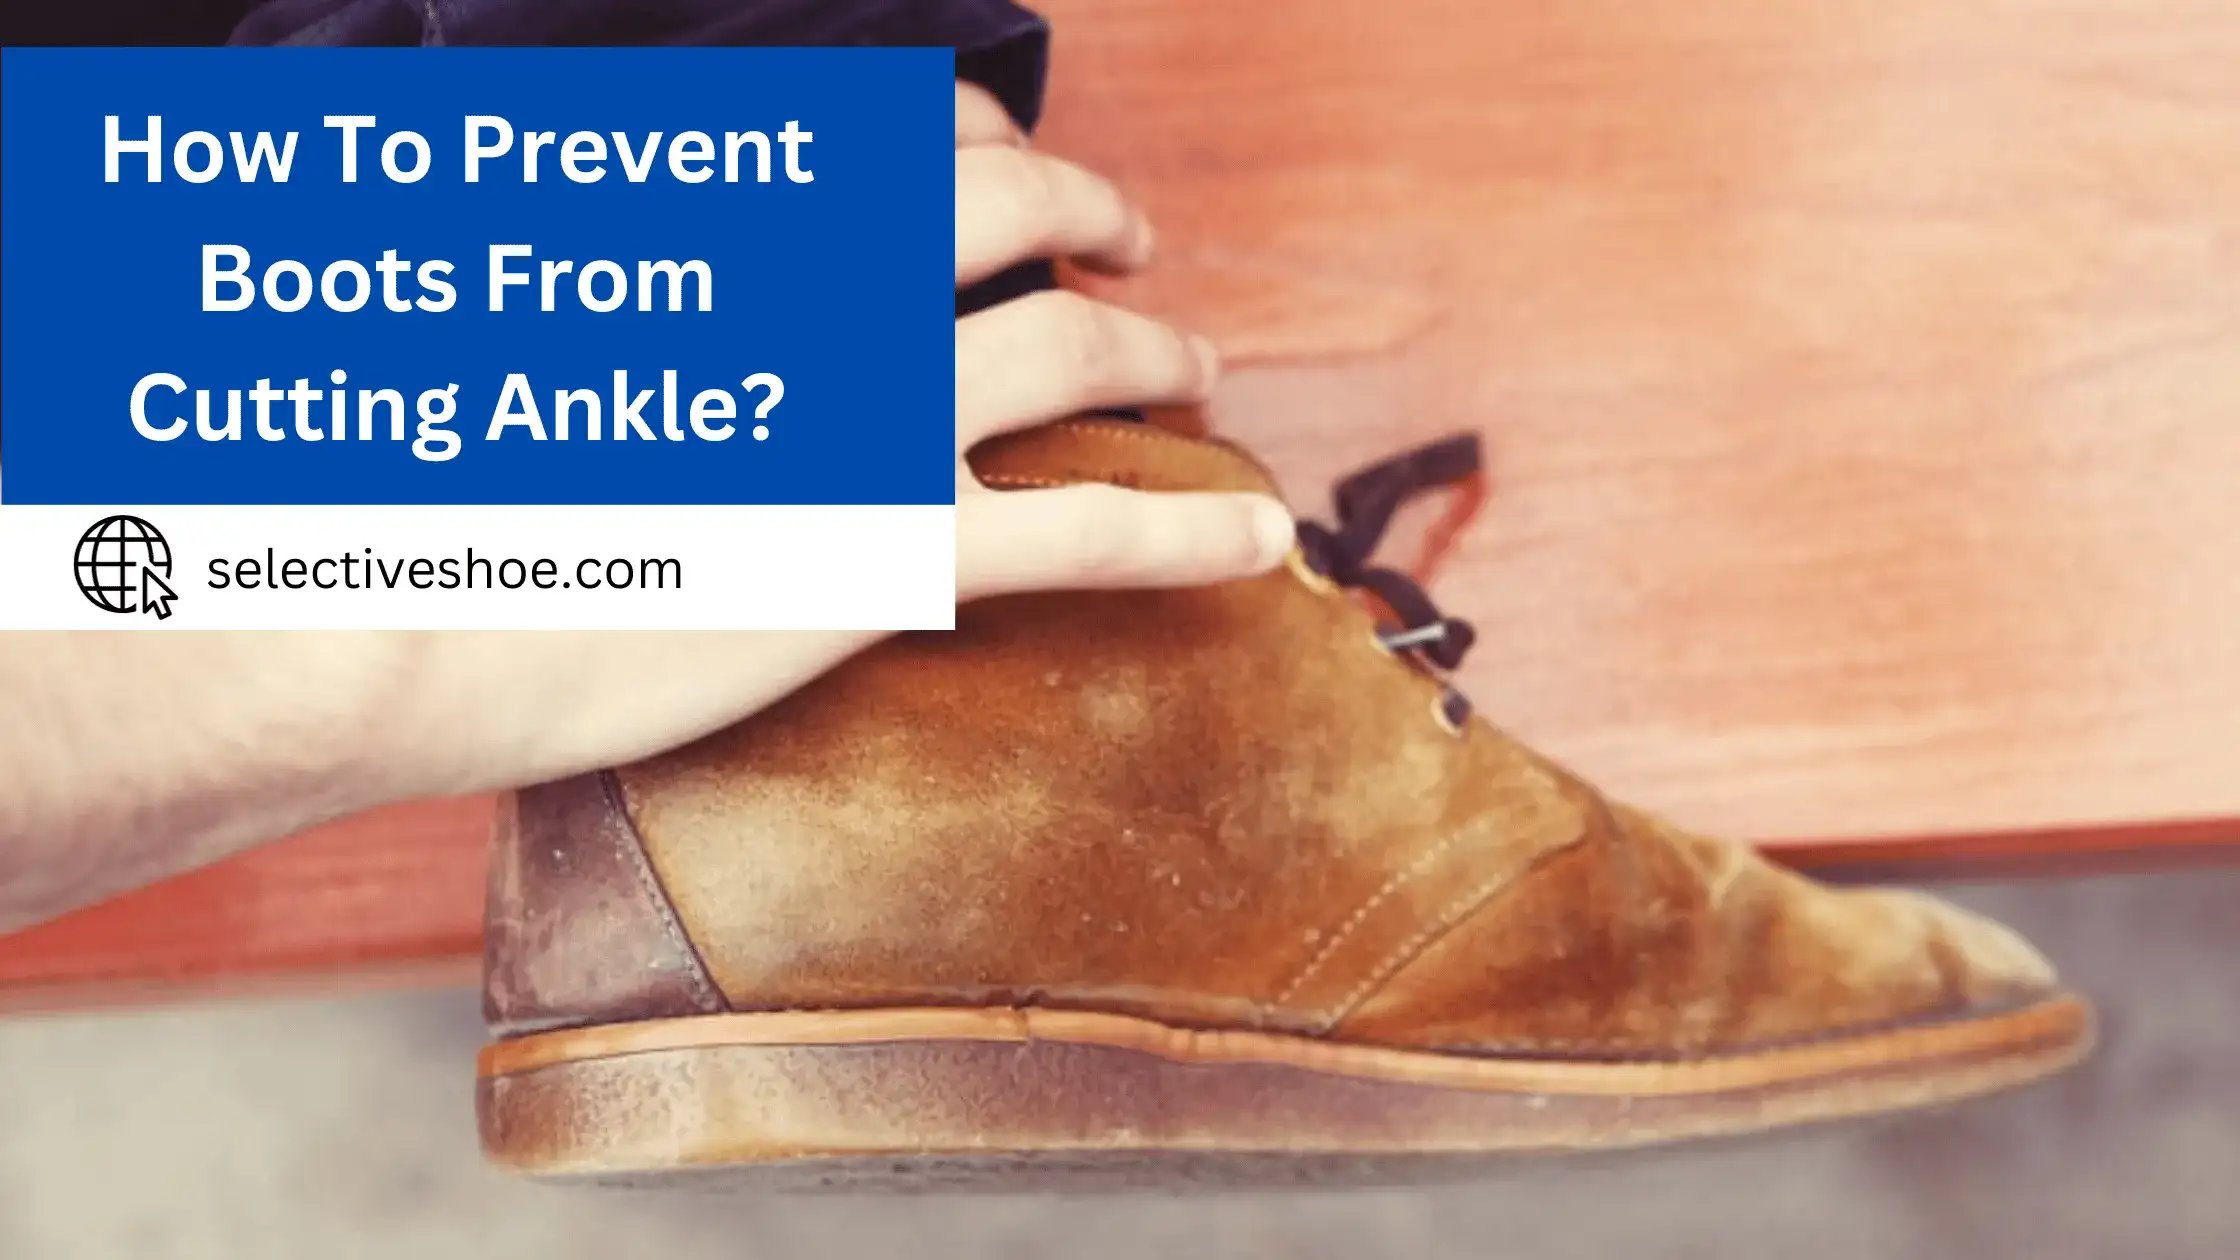 How To Prevent Boots From Cutting Ankle? (An In-Depth Guide)